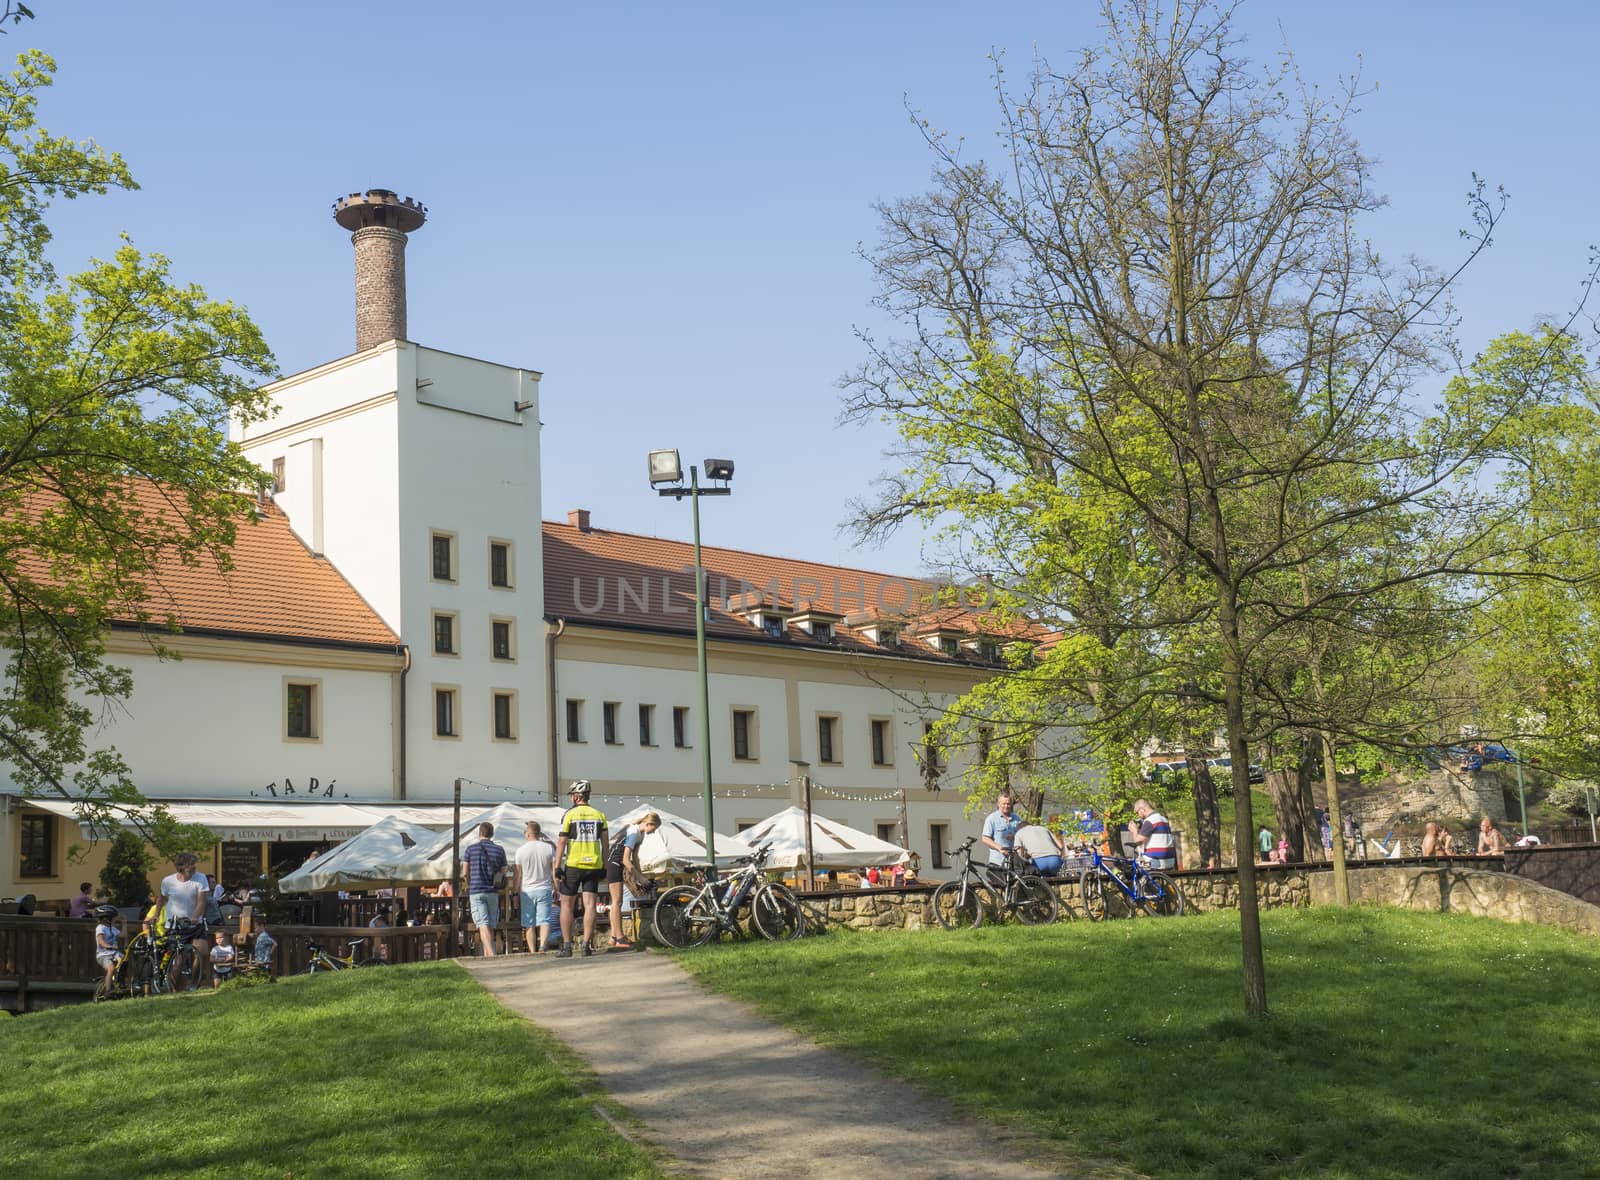 Czech Republic, Prague, Dolni Pocernice, April 21, 2018: old brewery restaurant Pansky dvur Dolni Pocernice with group of people and cyclist relaxing on garden tables, trees, blue sky background, early spring day